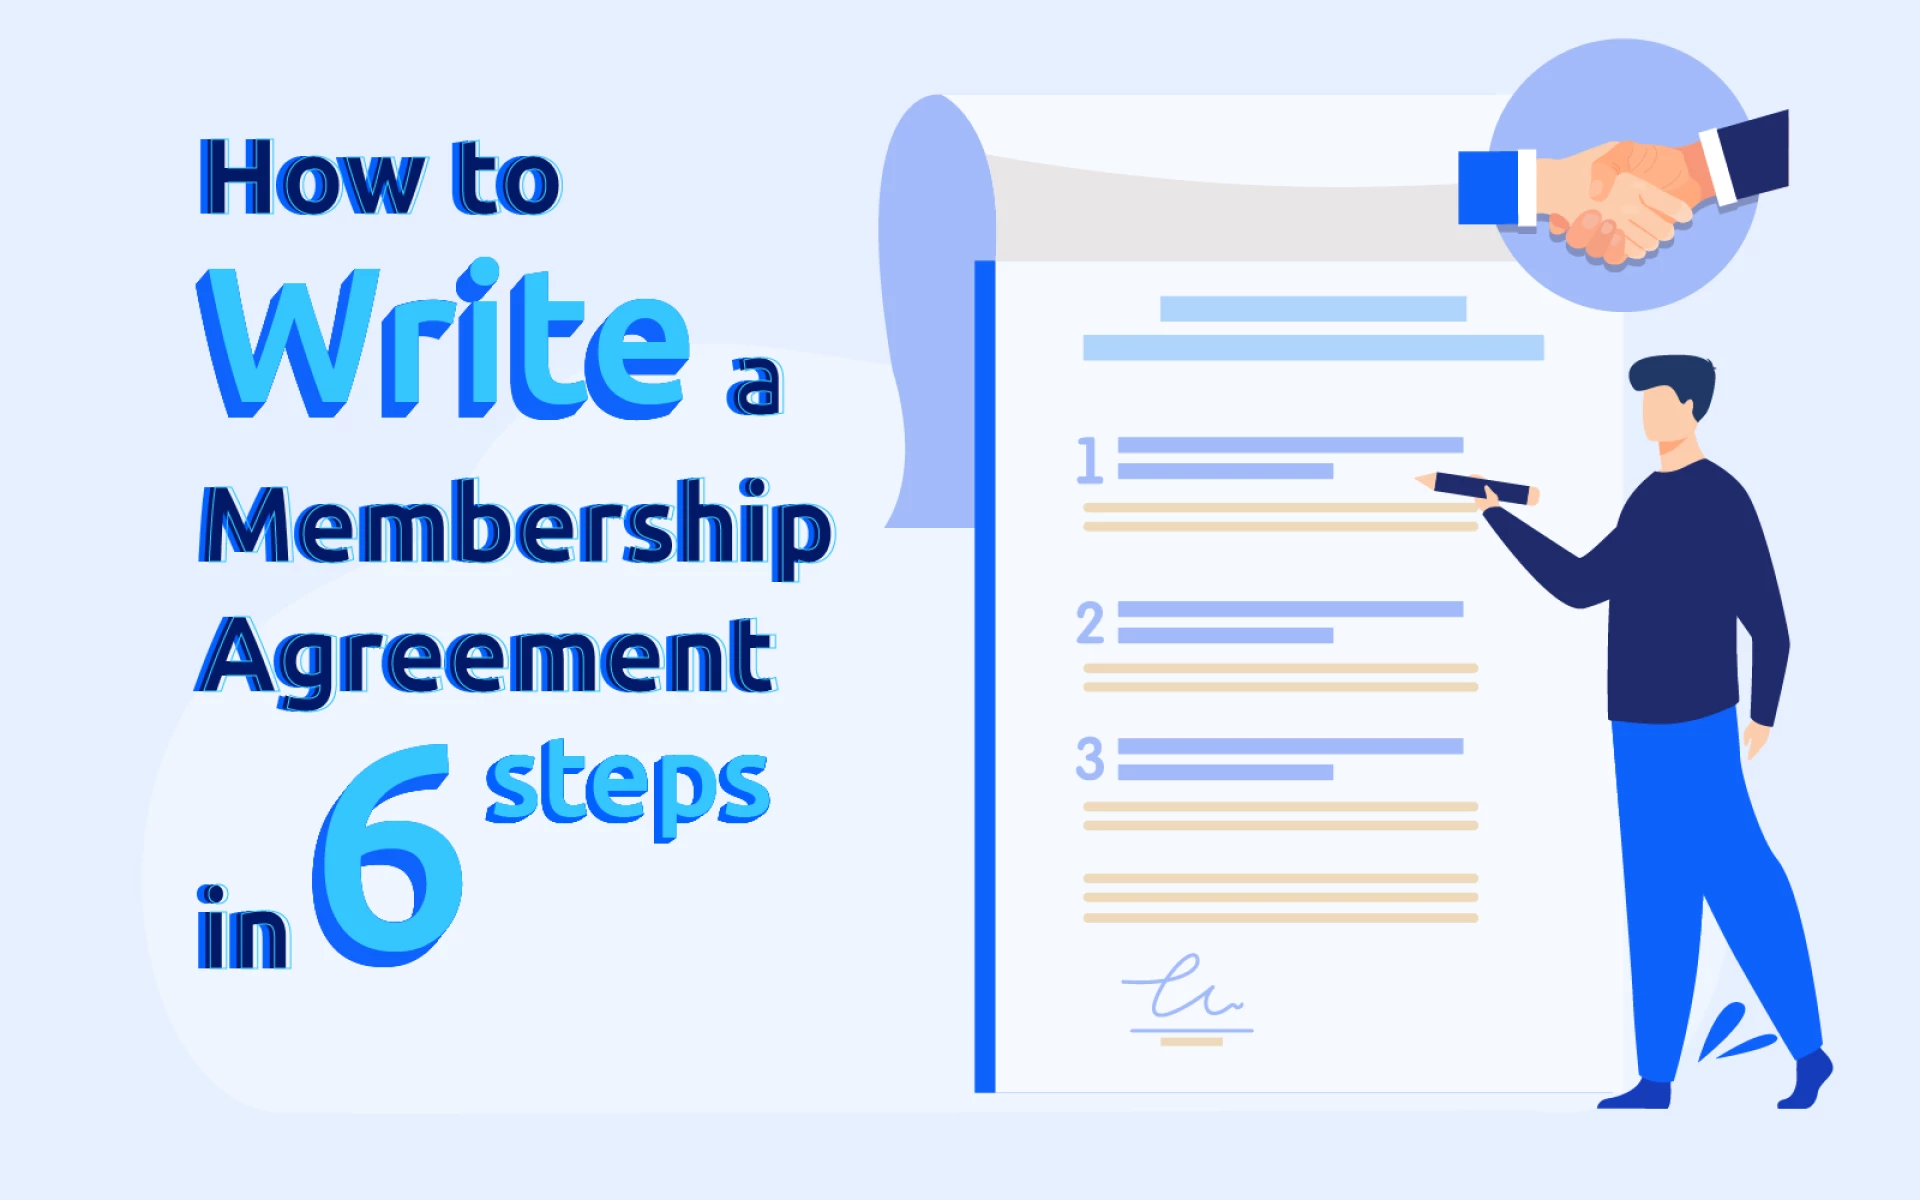 How to Write a Membership Agreement in 6 Steps?